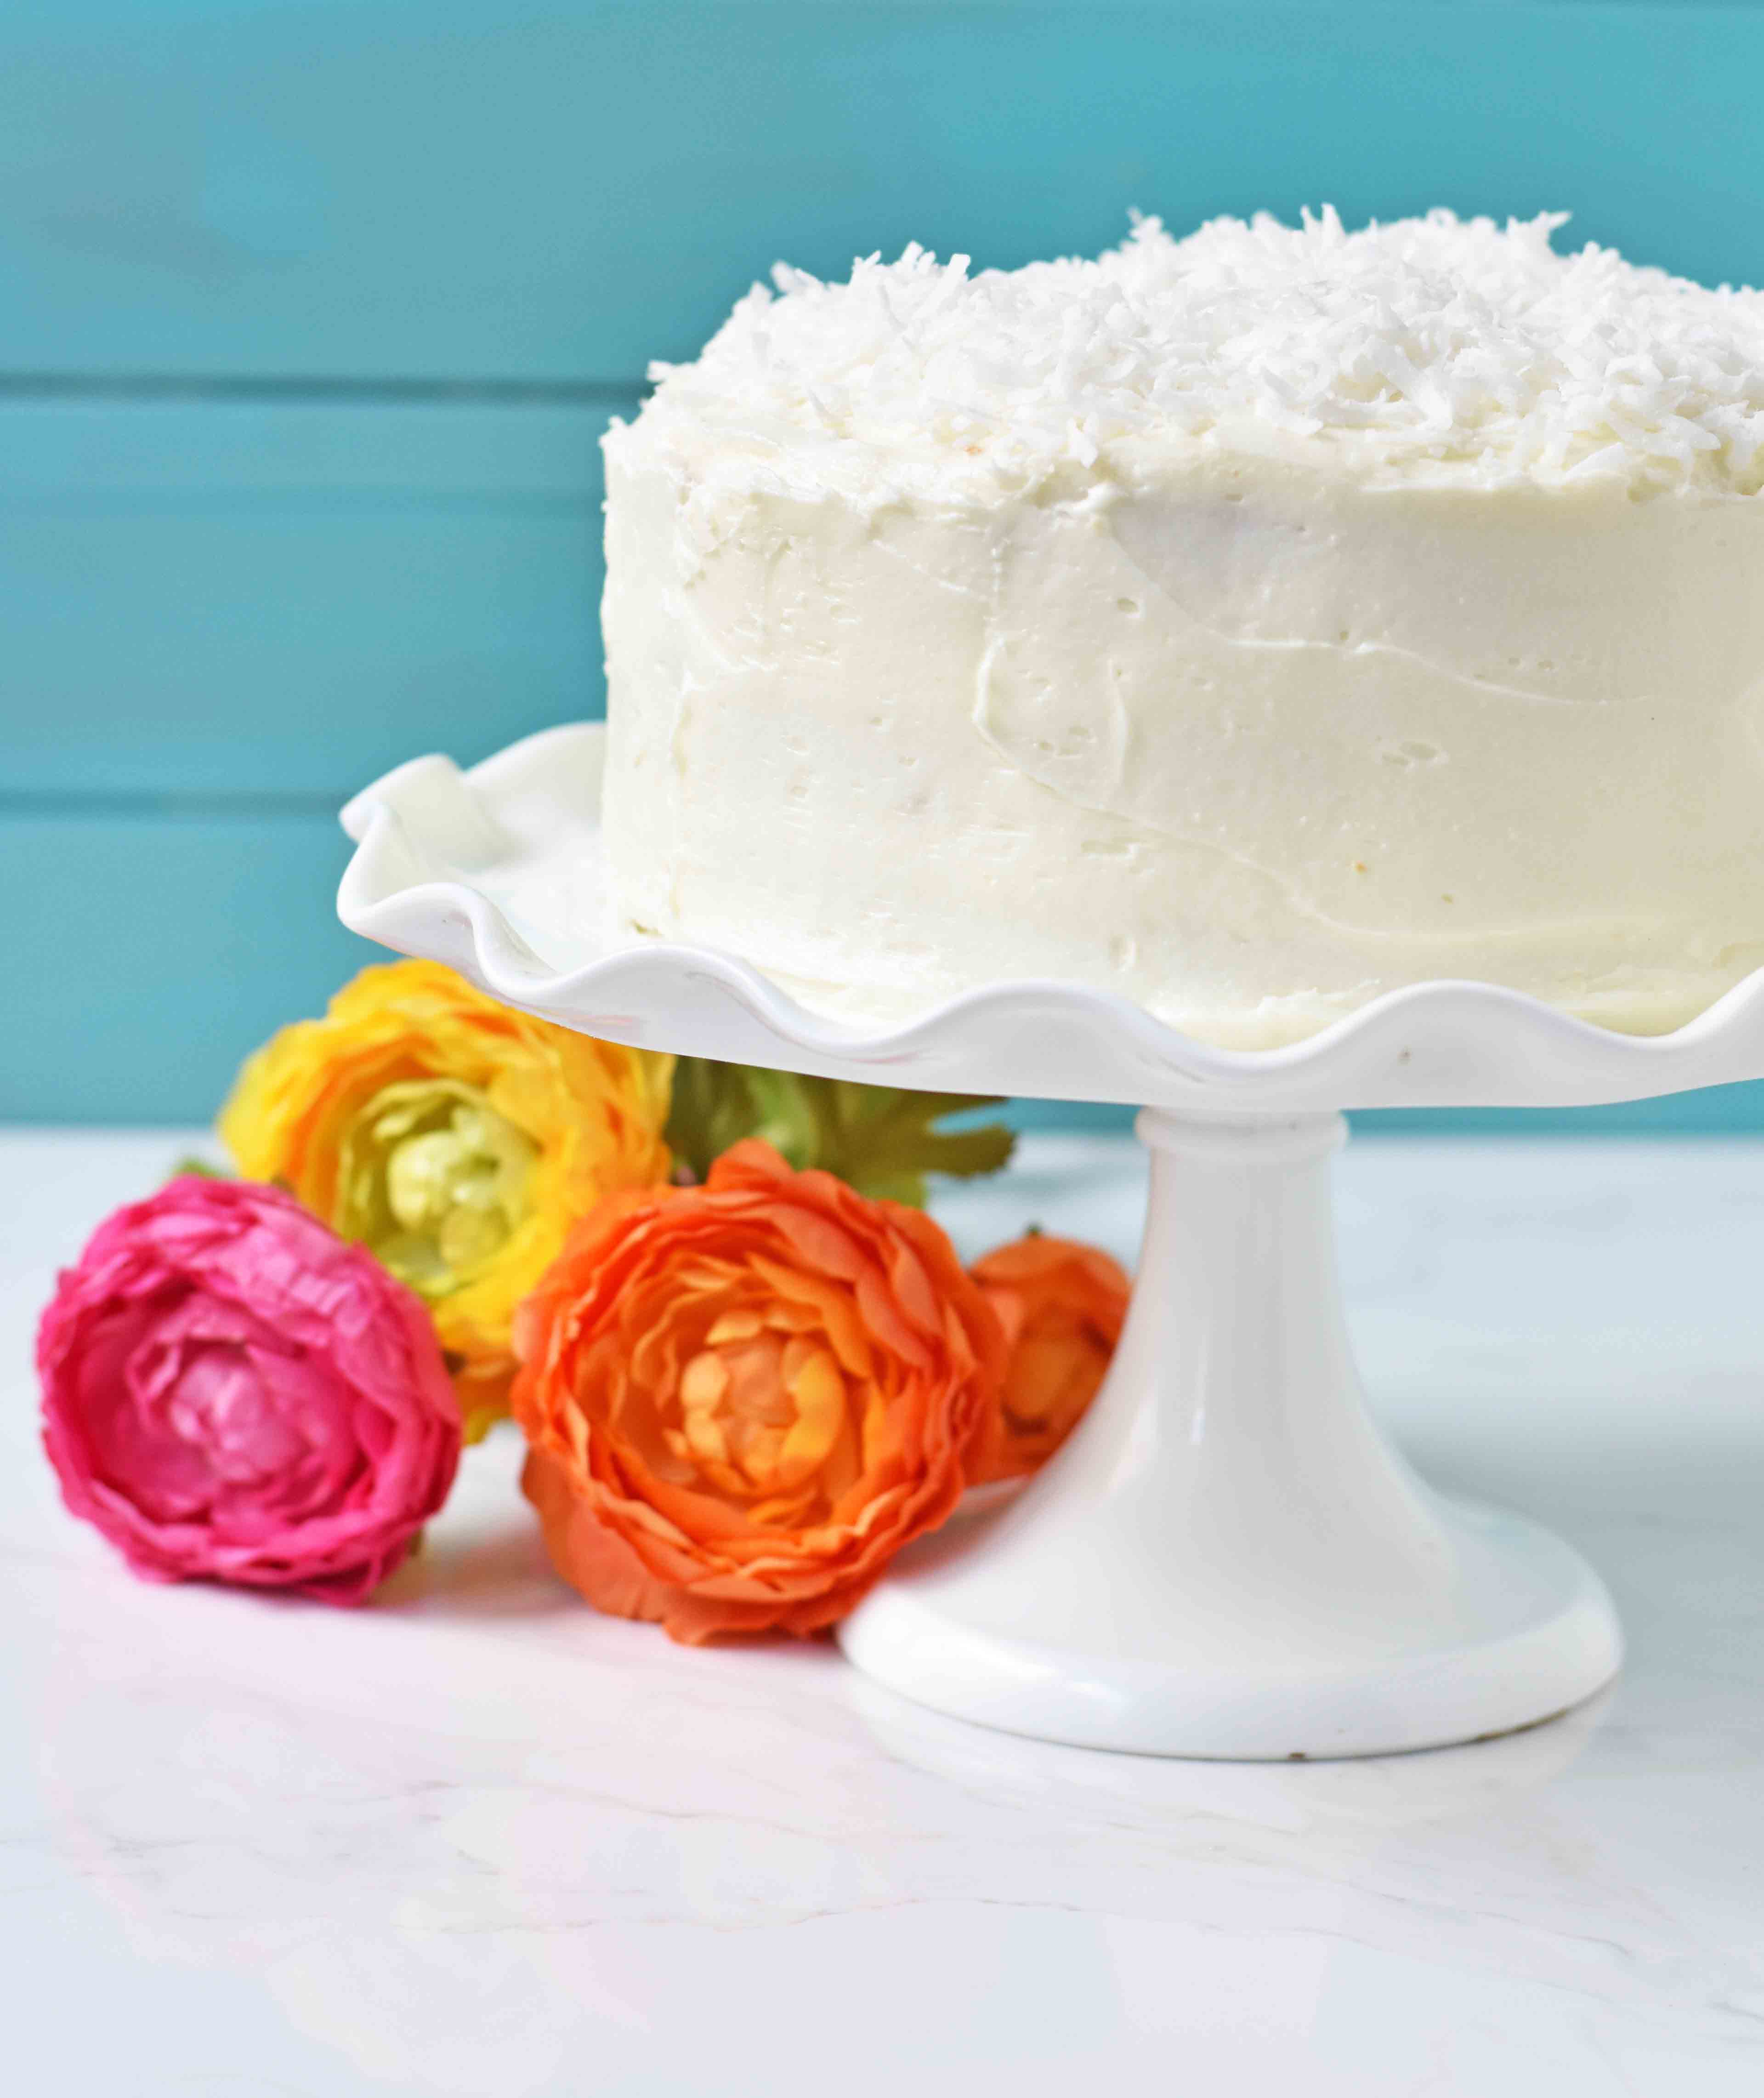 Best Coconut Layer Cake Recipe - How To Make Coconut Layer Cake